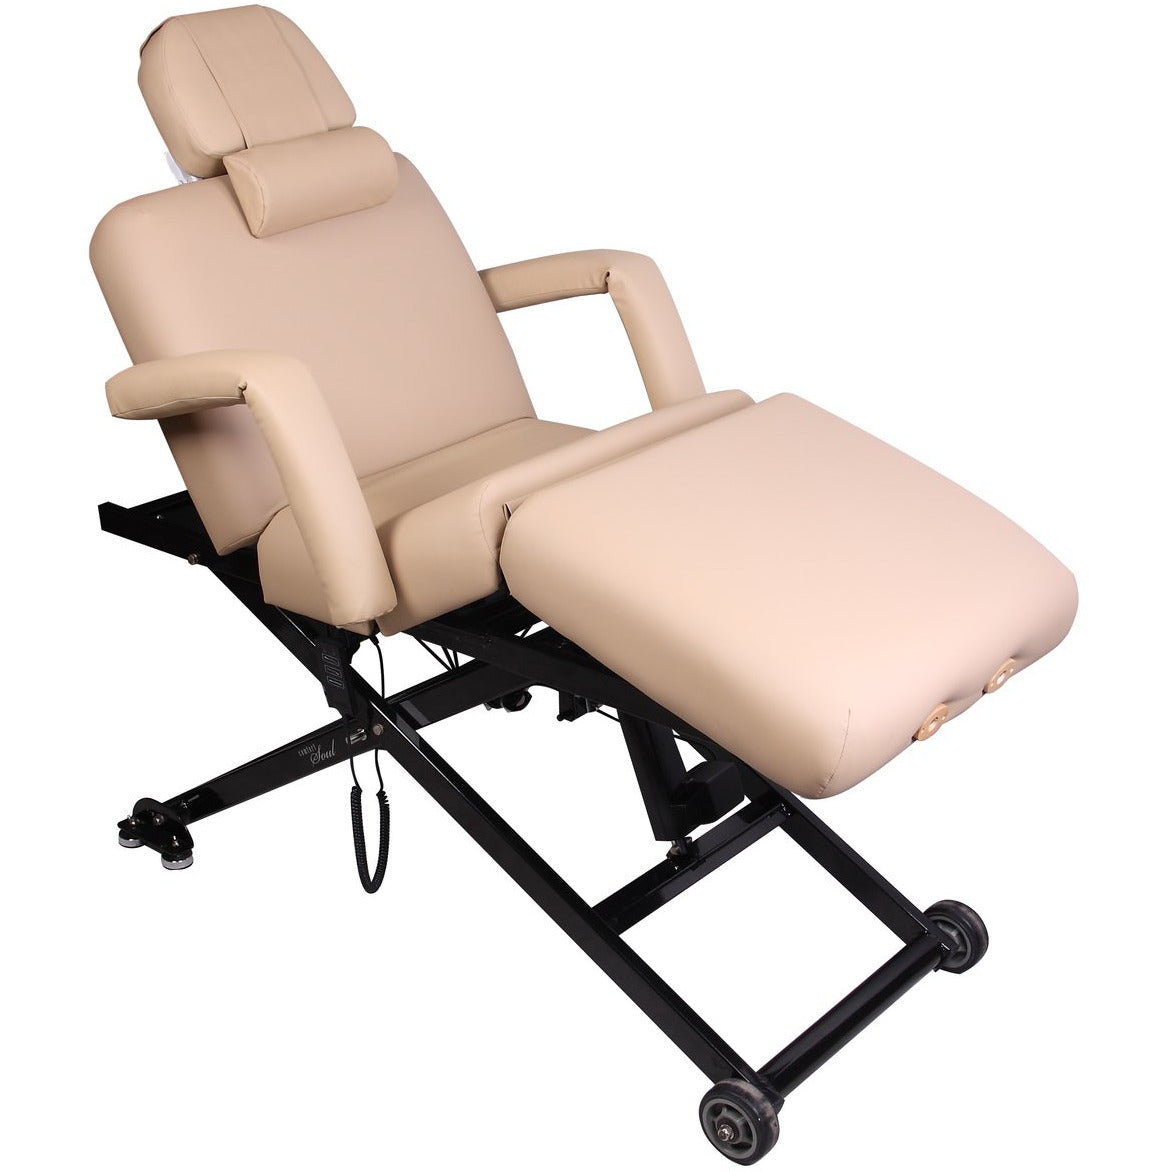 Comfort in adjustable treatment chairs with electric actuators